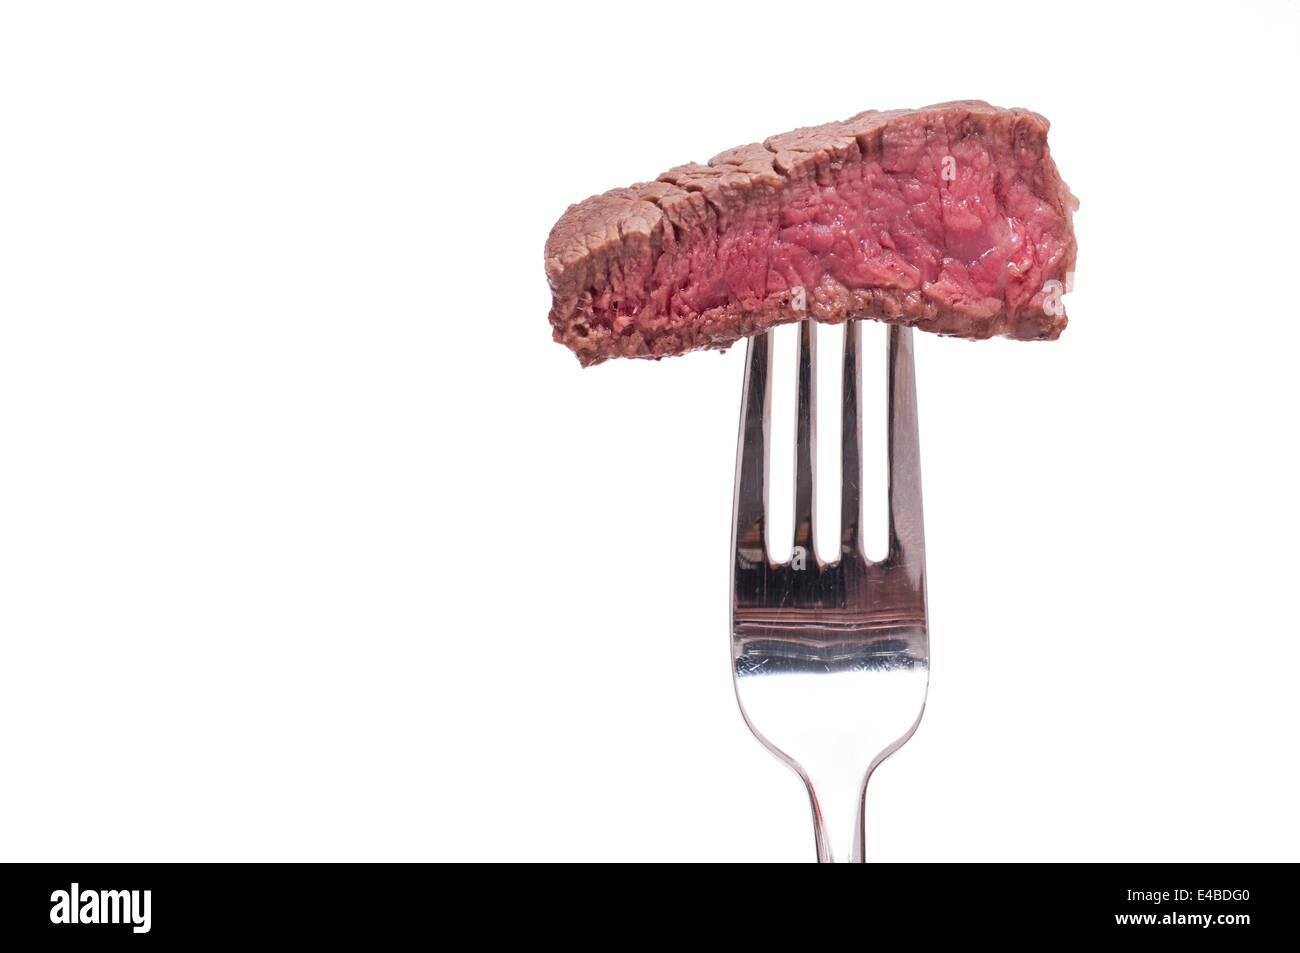 Rare beef on a fork Stock Photo - Alamy